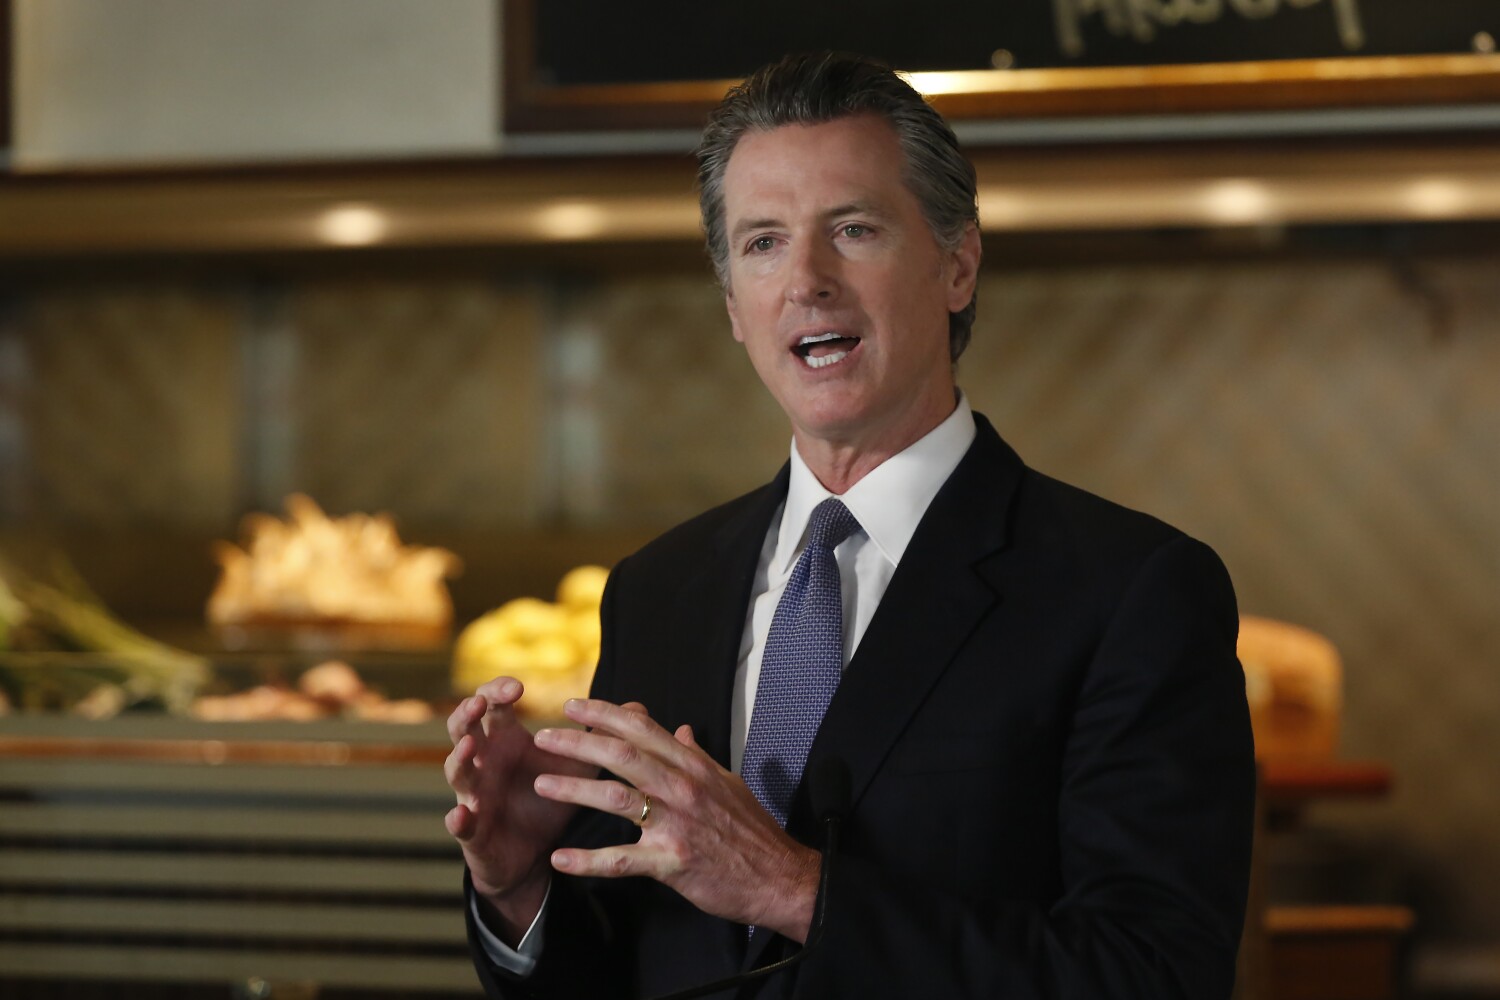 Newsom wise to end one-man rule on coronavirus, giving local leaders more discretion